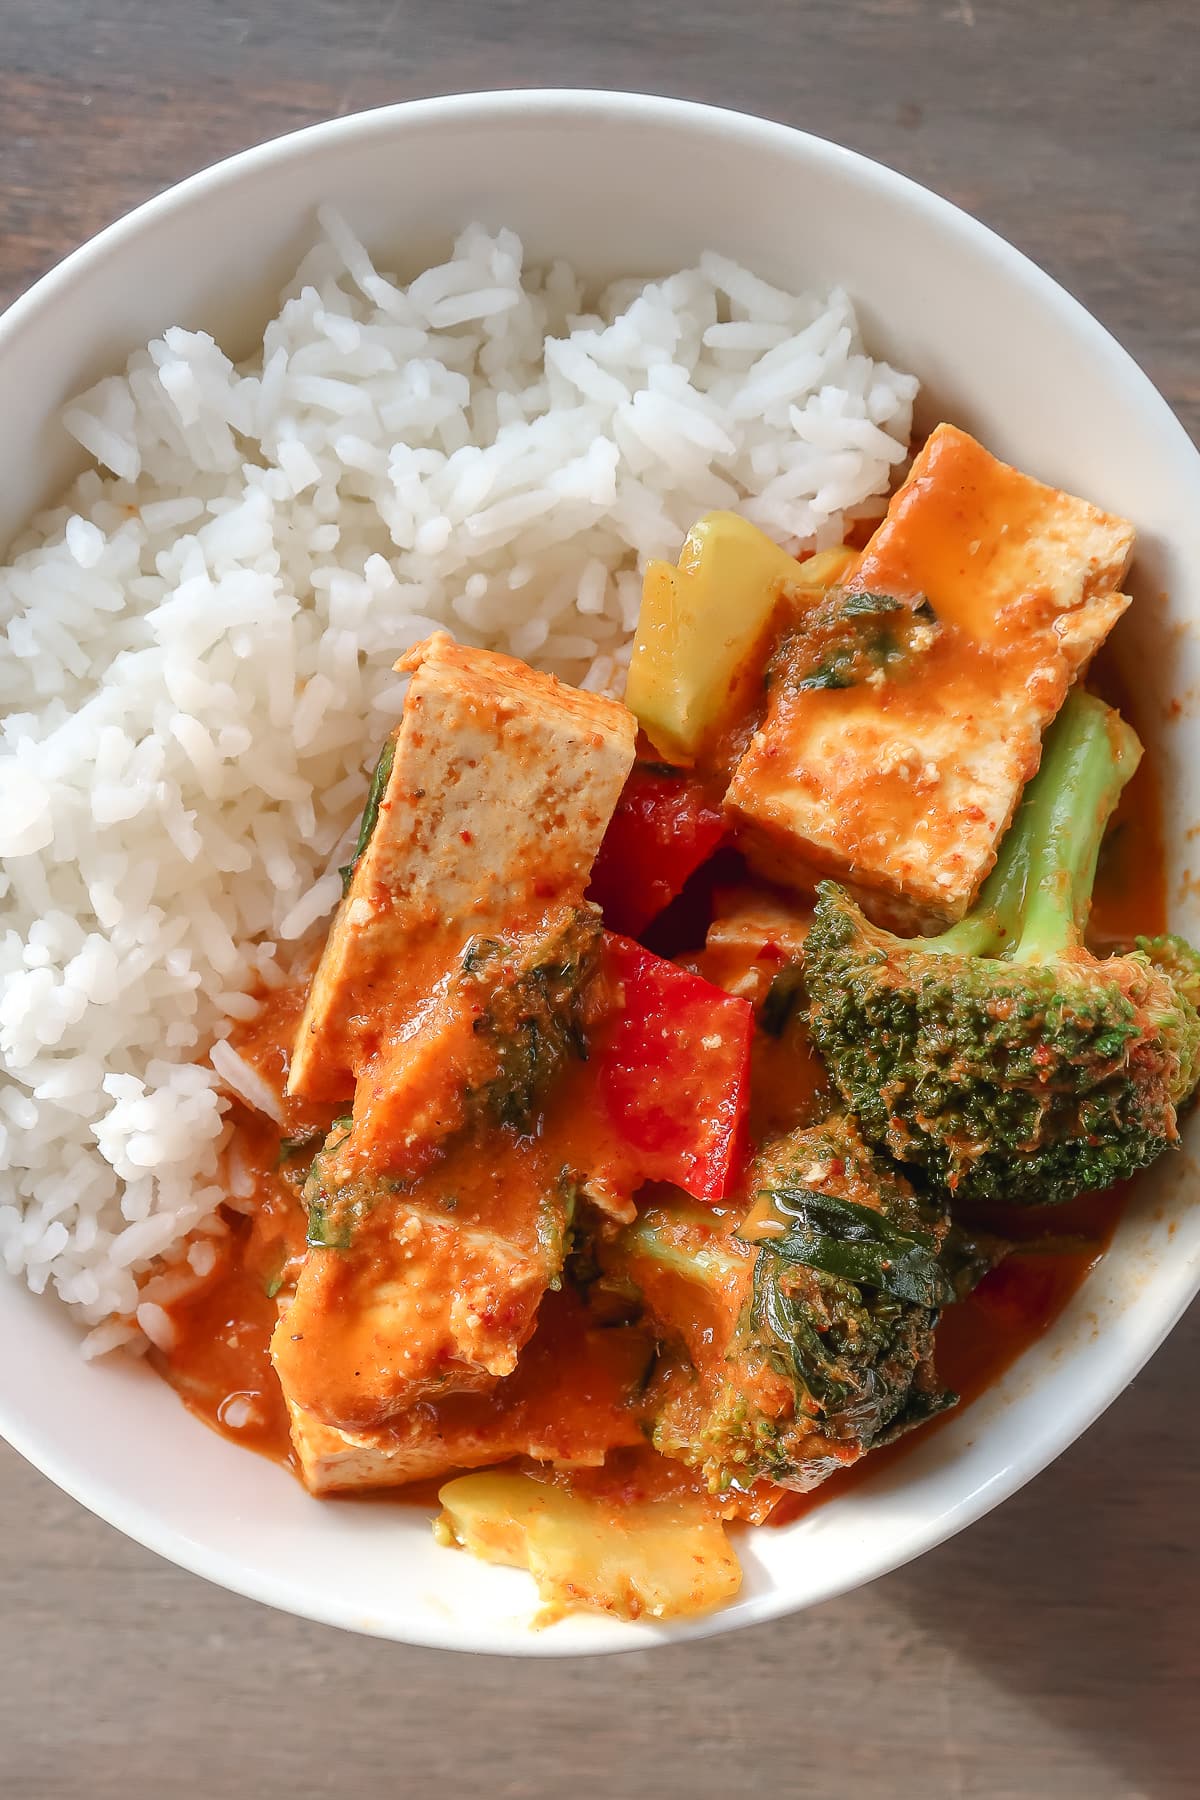 Red curry with tofu and vegetables in a bowl with rice